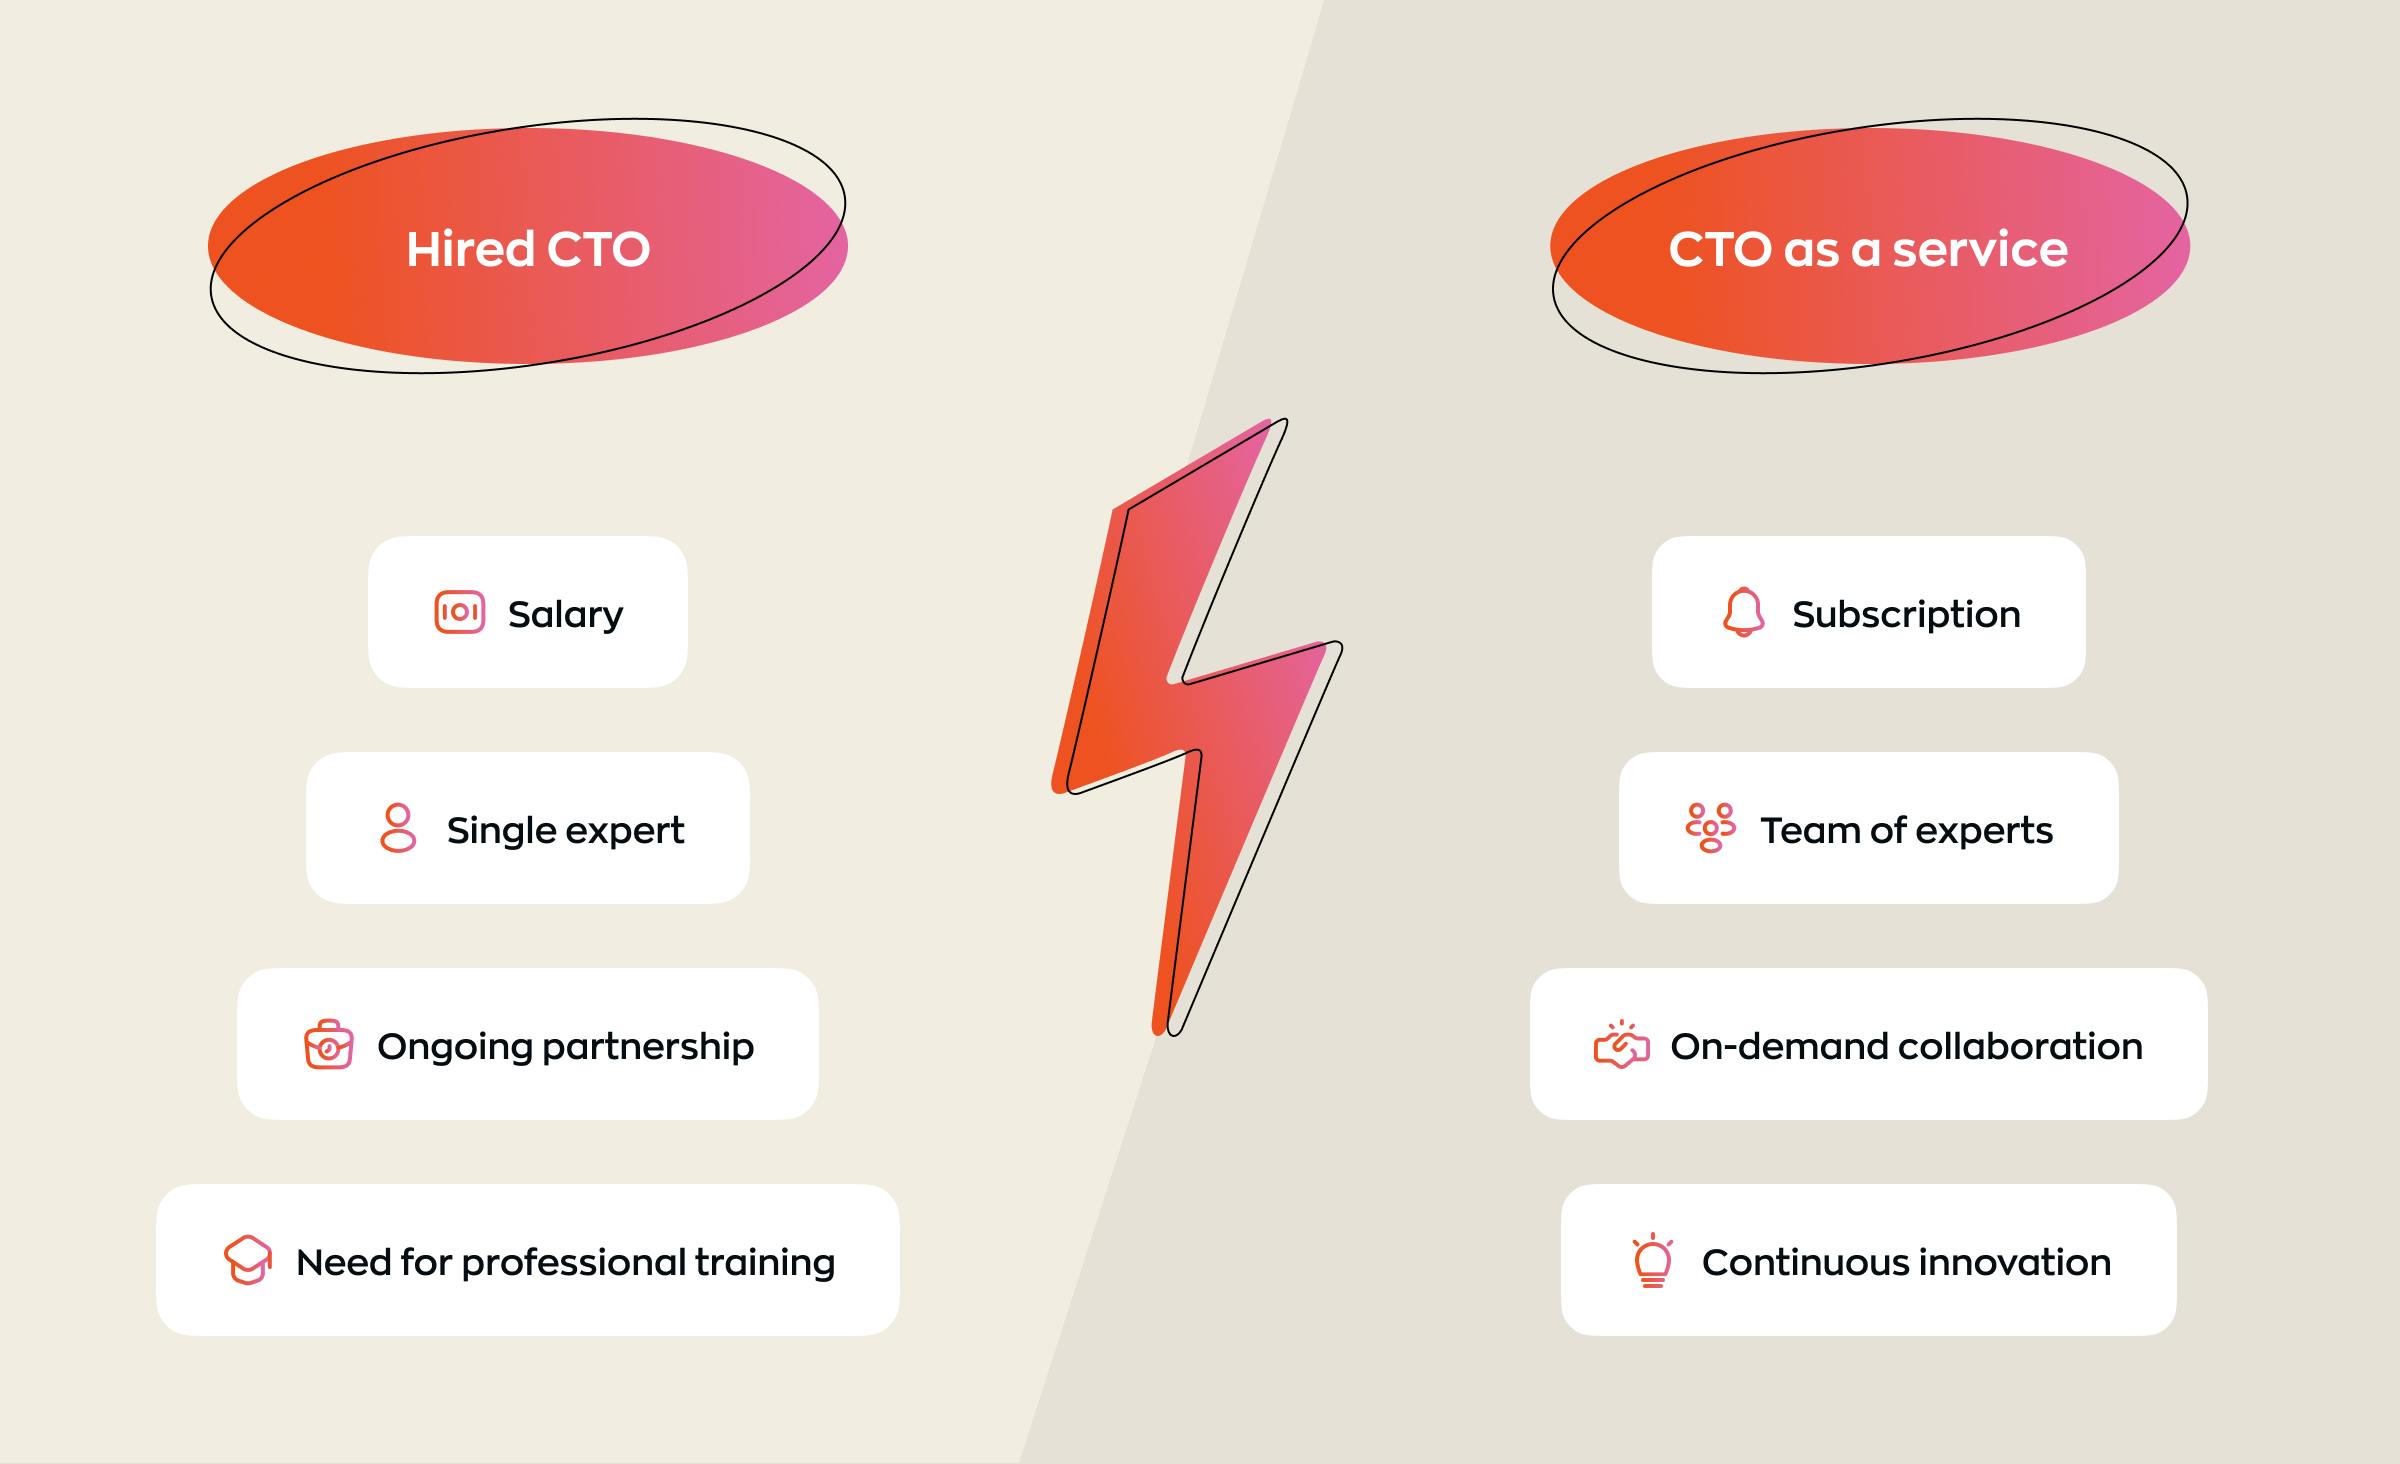 Comparison between a hired CTO and a CTO as a service for startups